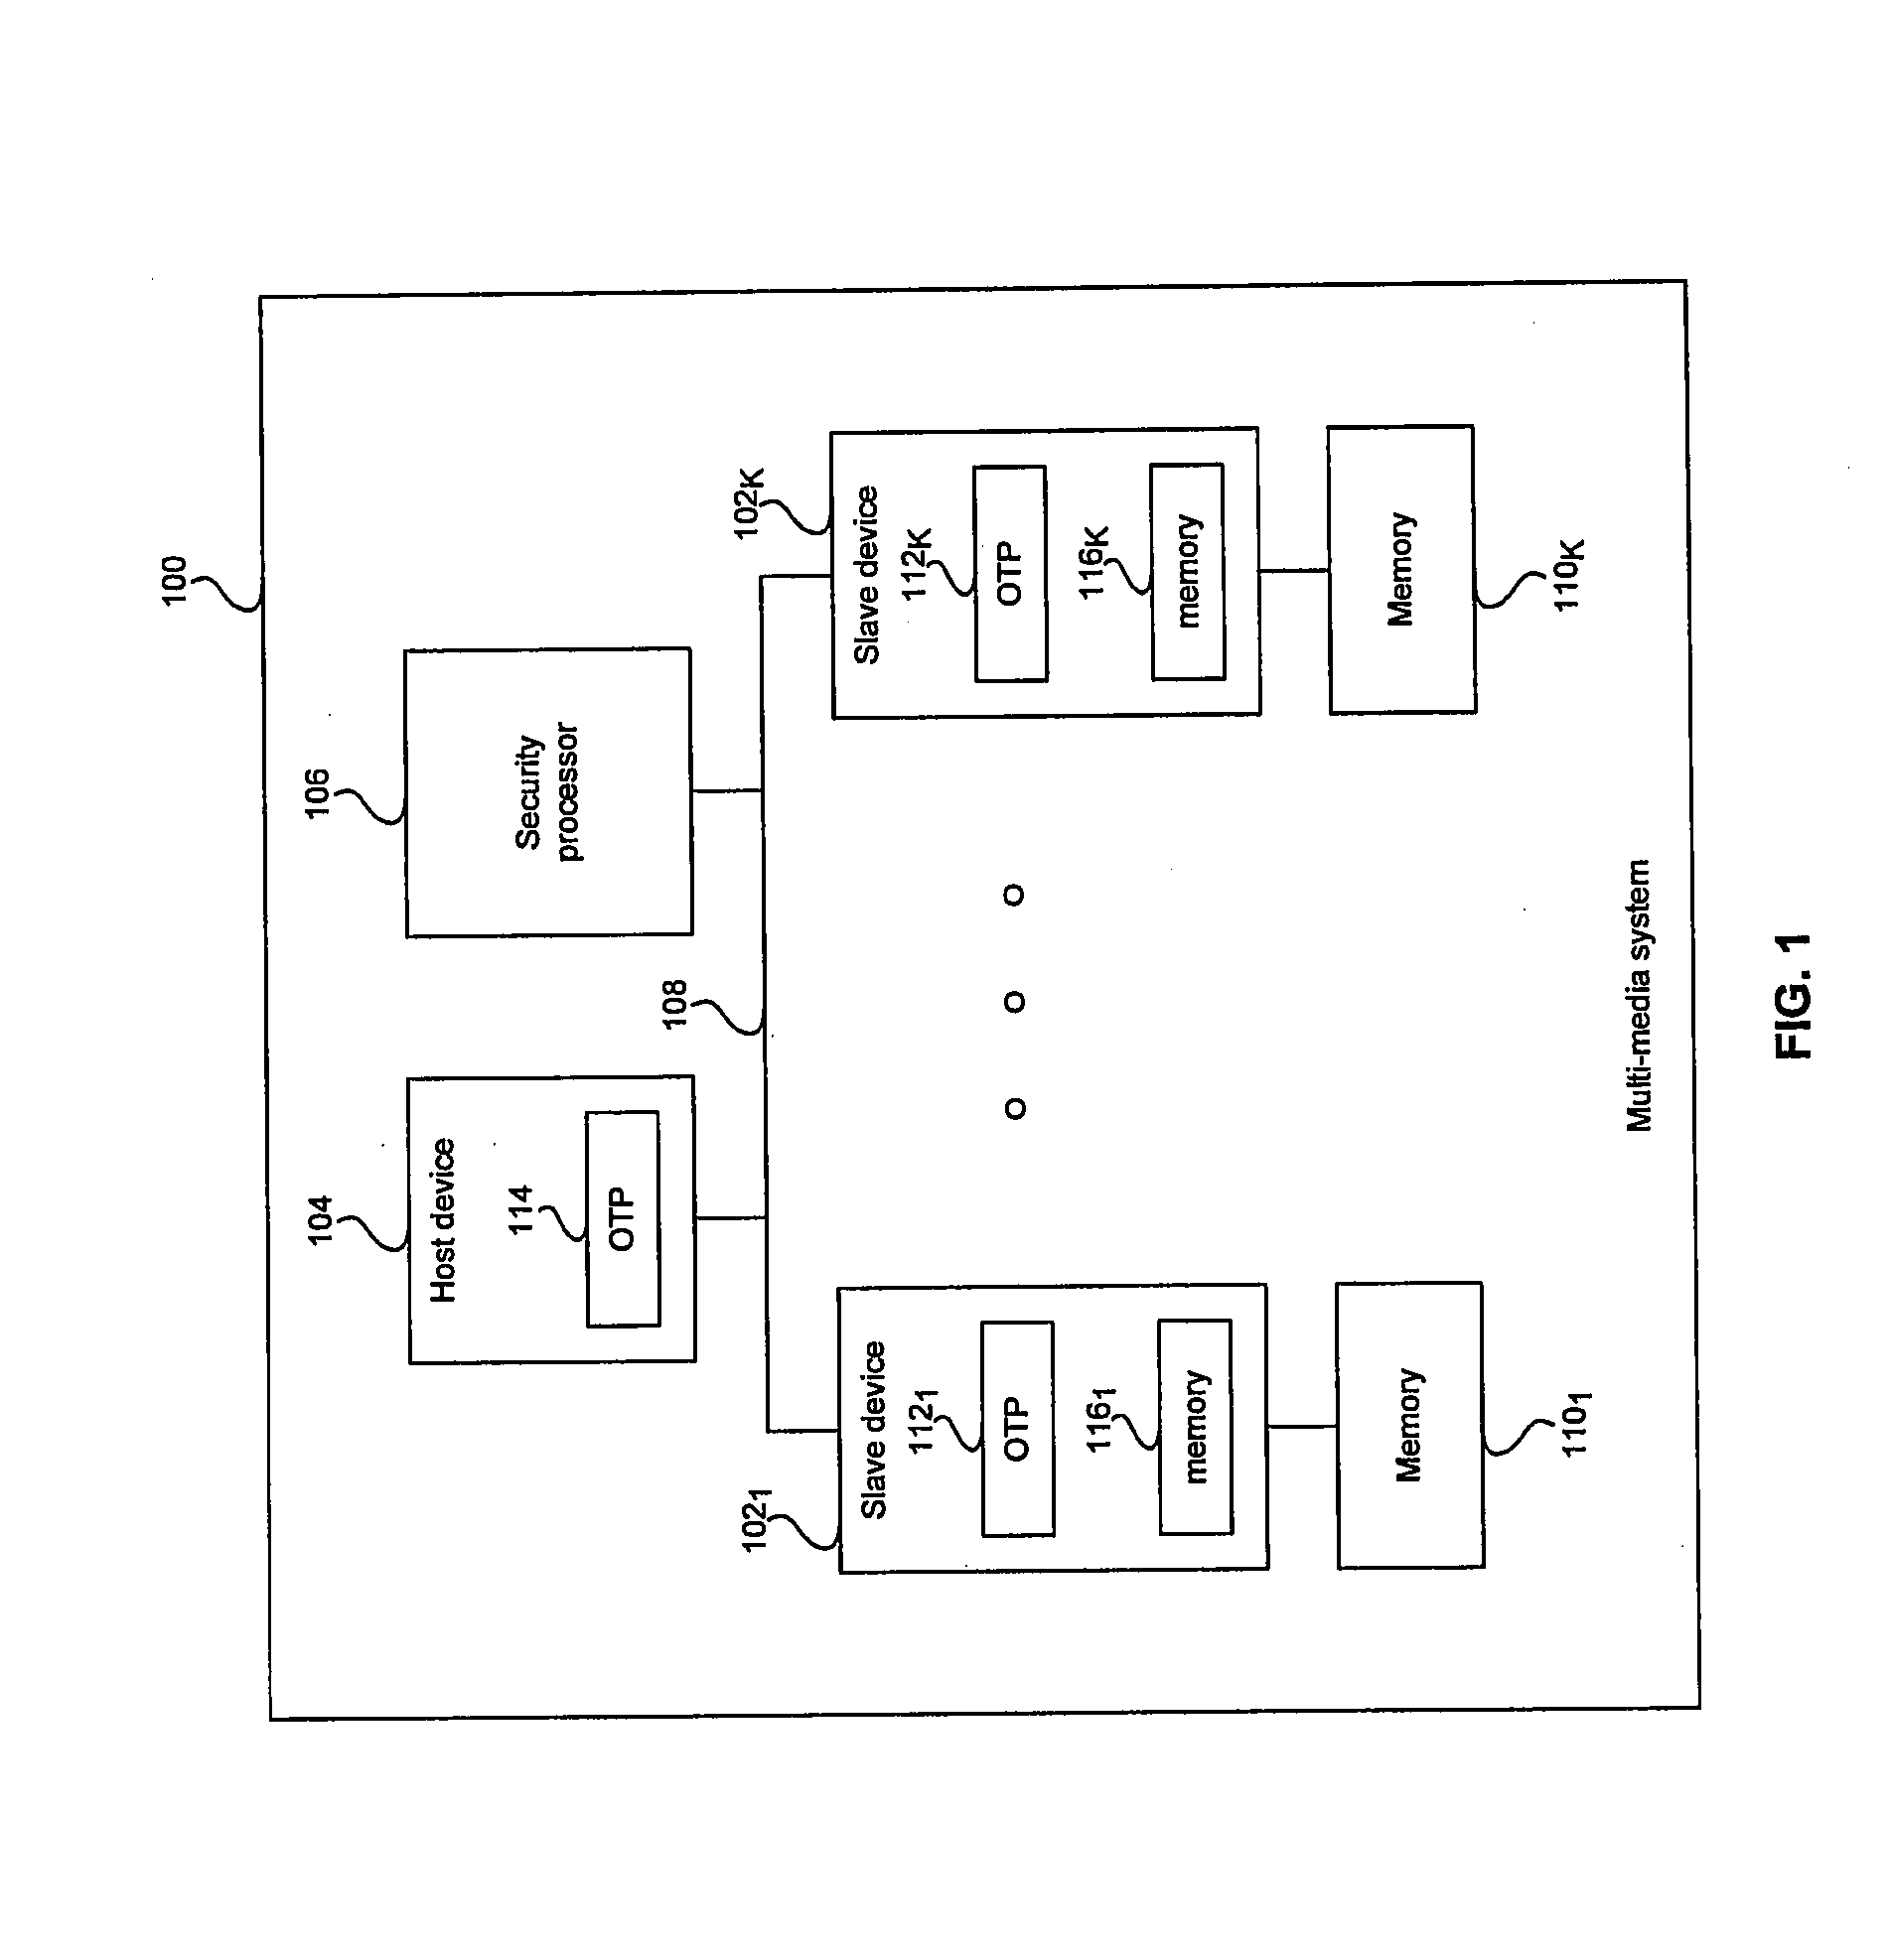 Method and System For Memory Attack Protection To Achieve a Secure Interface